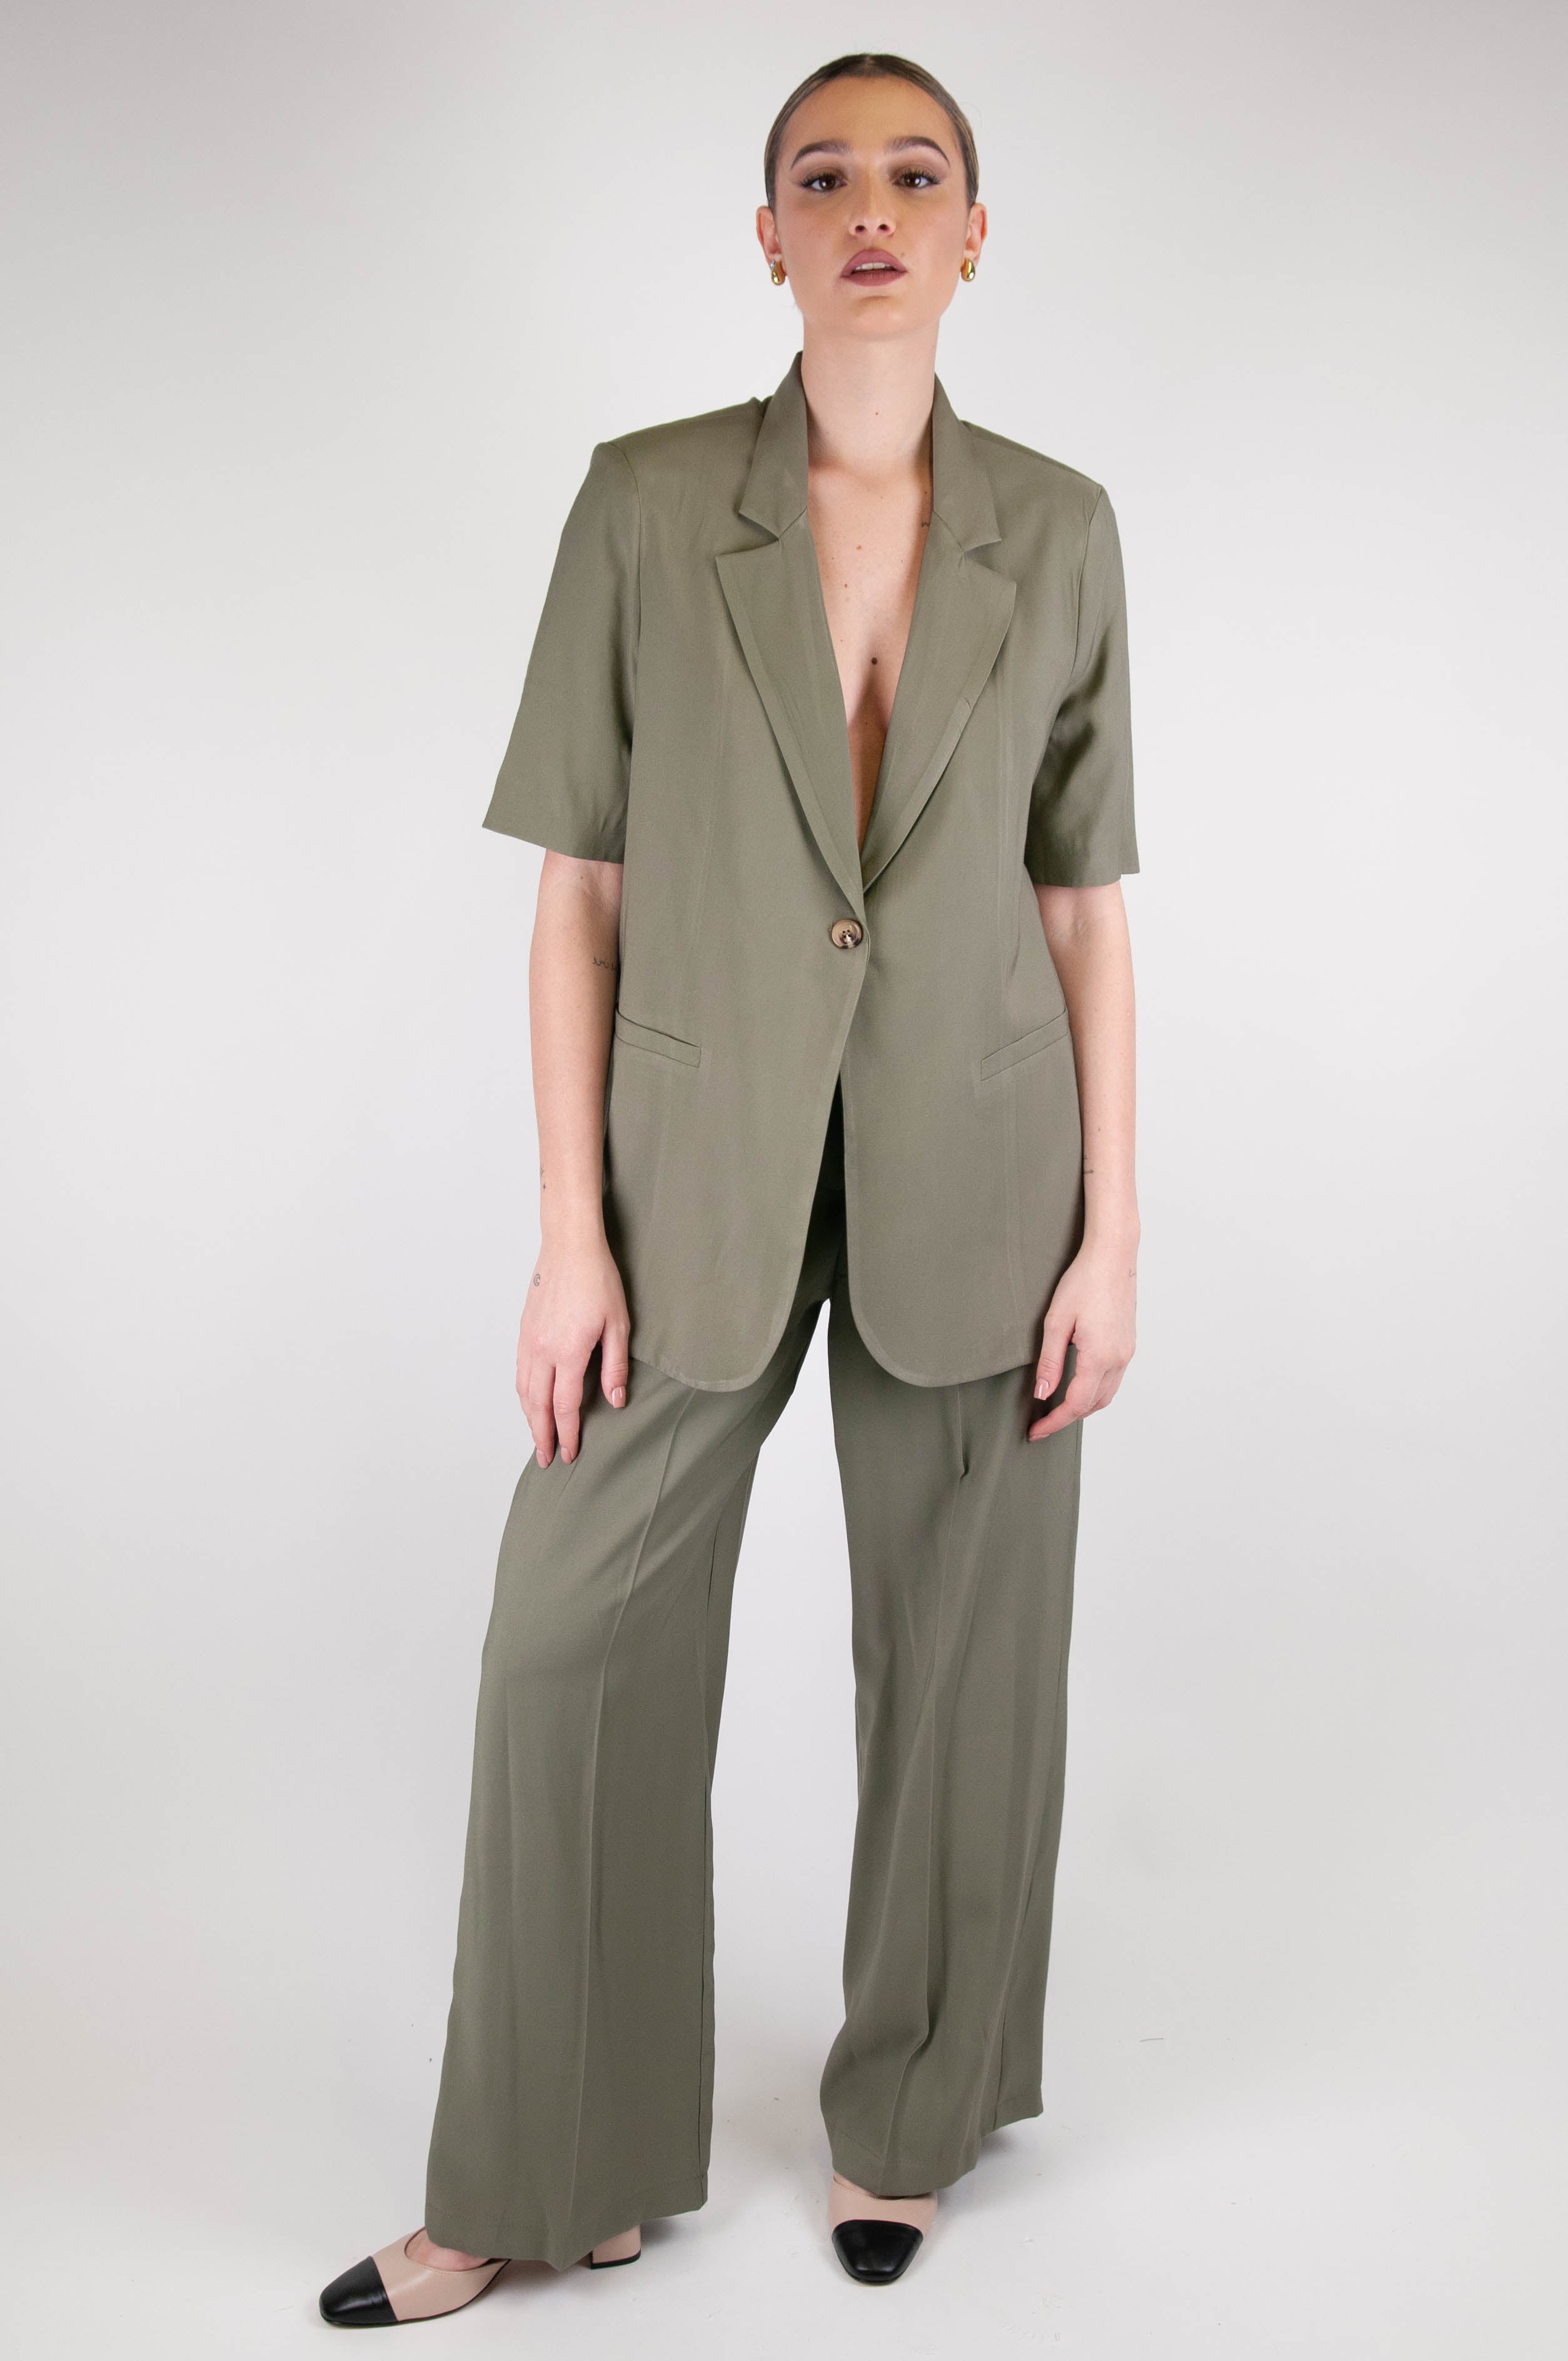 Tension in - Palazzo trousers with elastic on the back